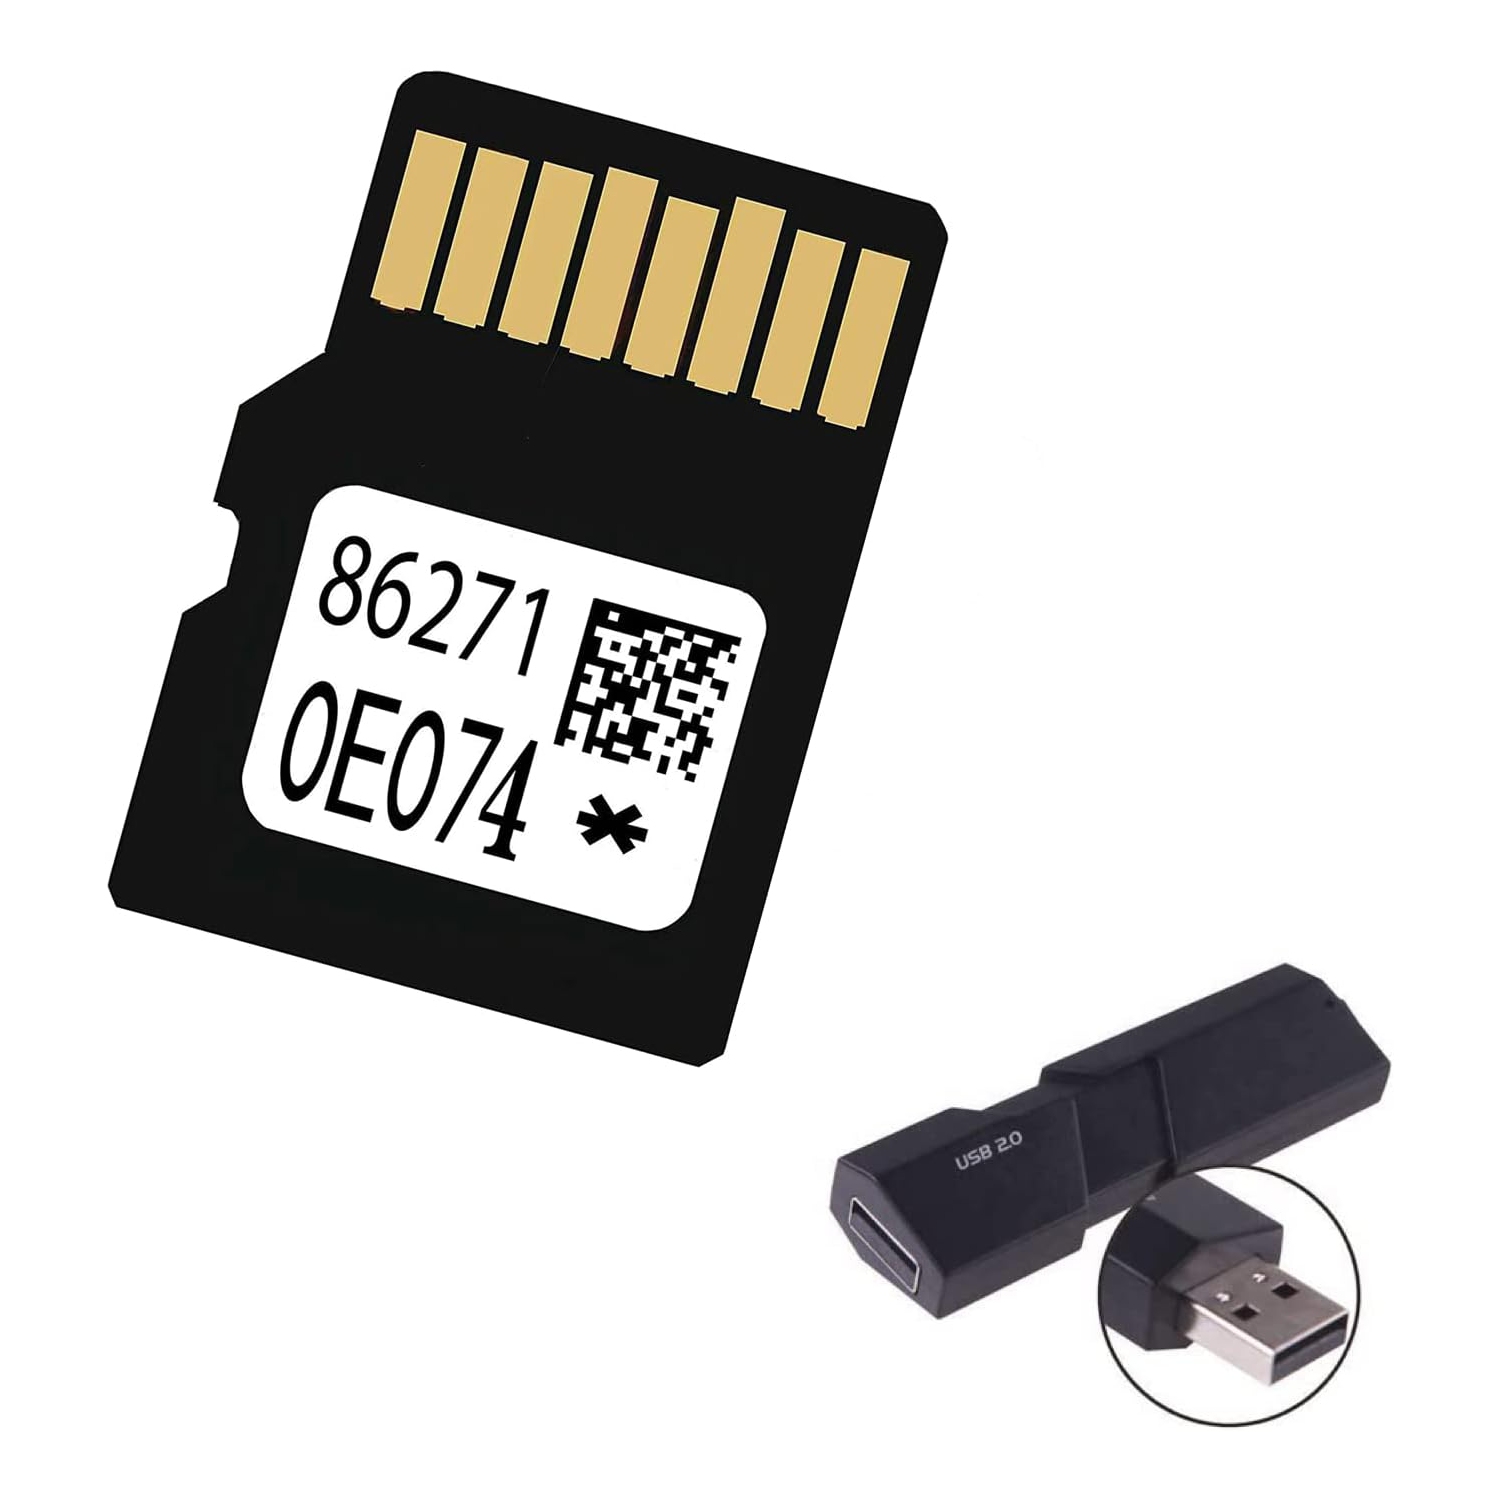 Latest Maps 8627I OEO74 Update Version 2022 Navigation SD Card Compatible with T.0.Y.0.T.A US/Canada/North America Maps